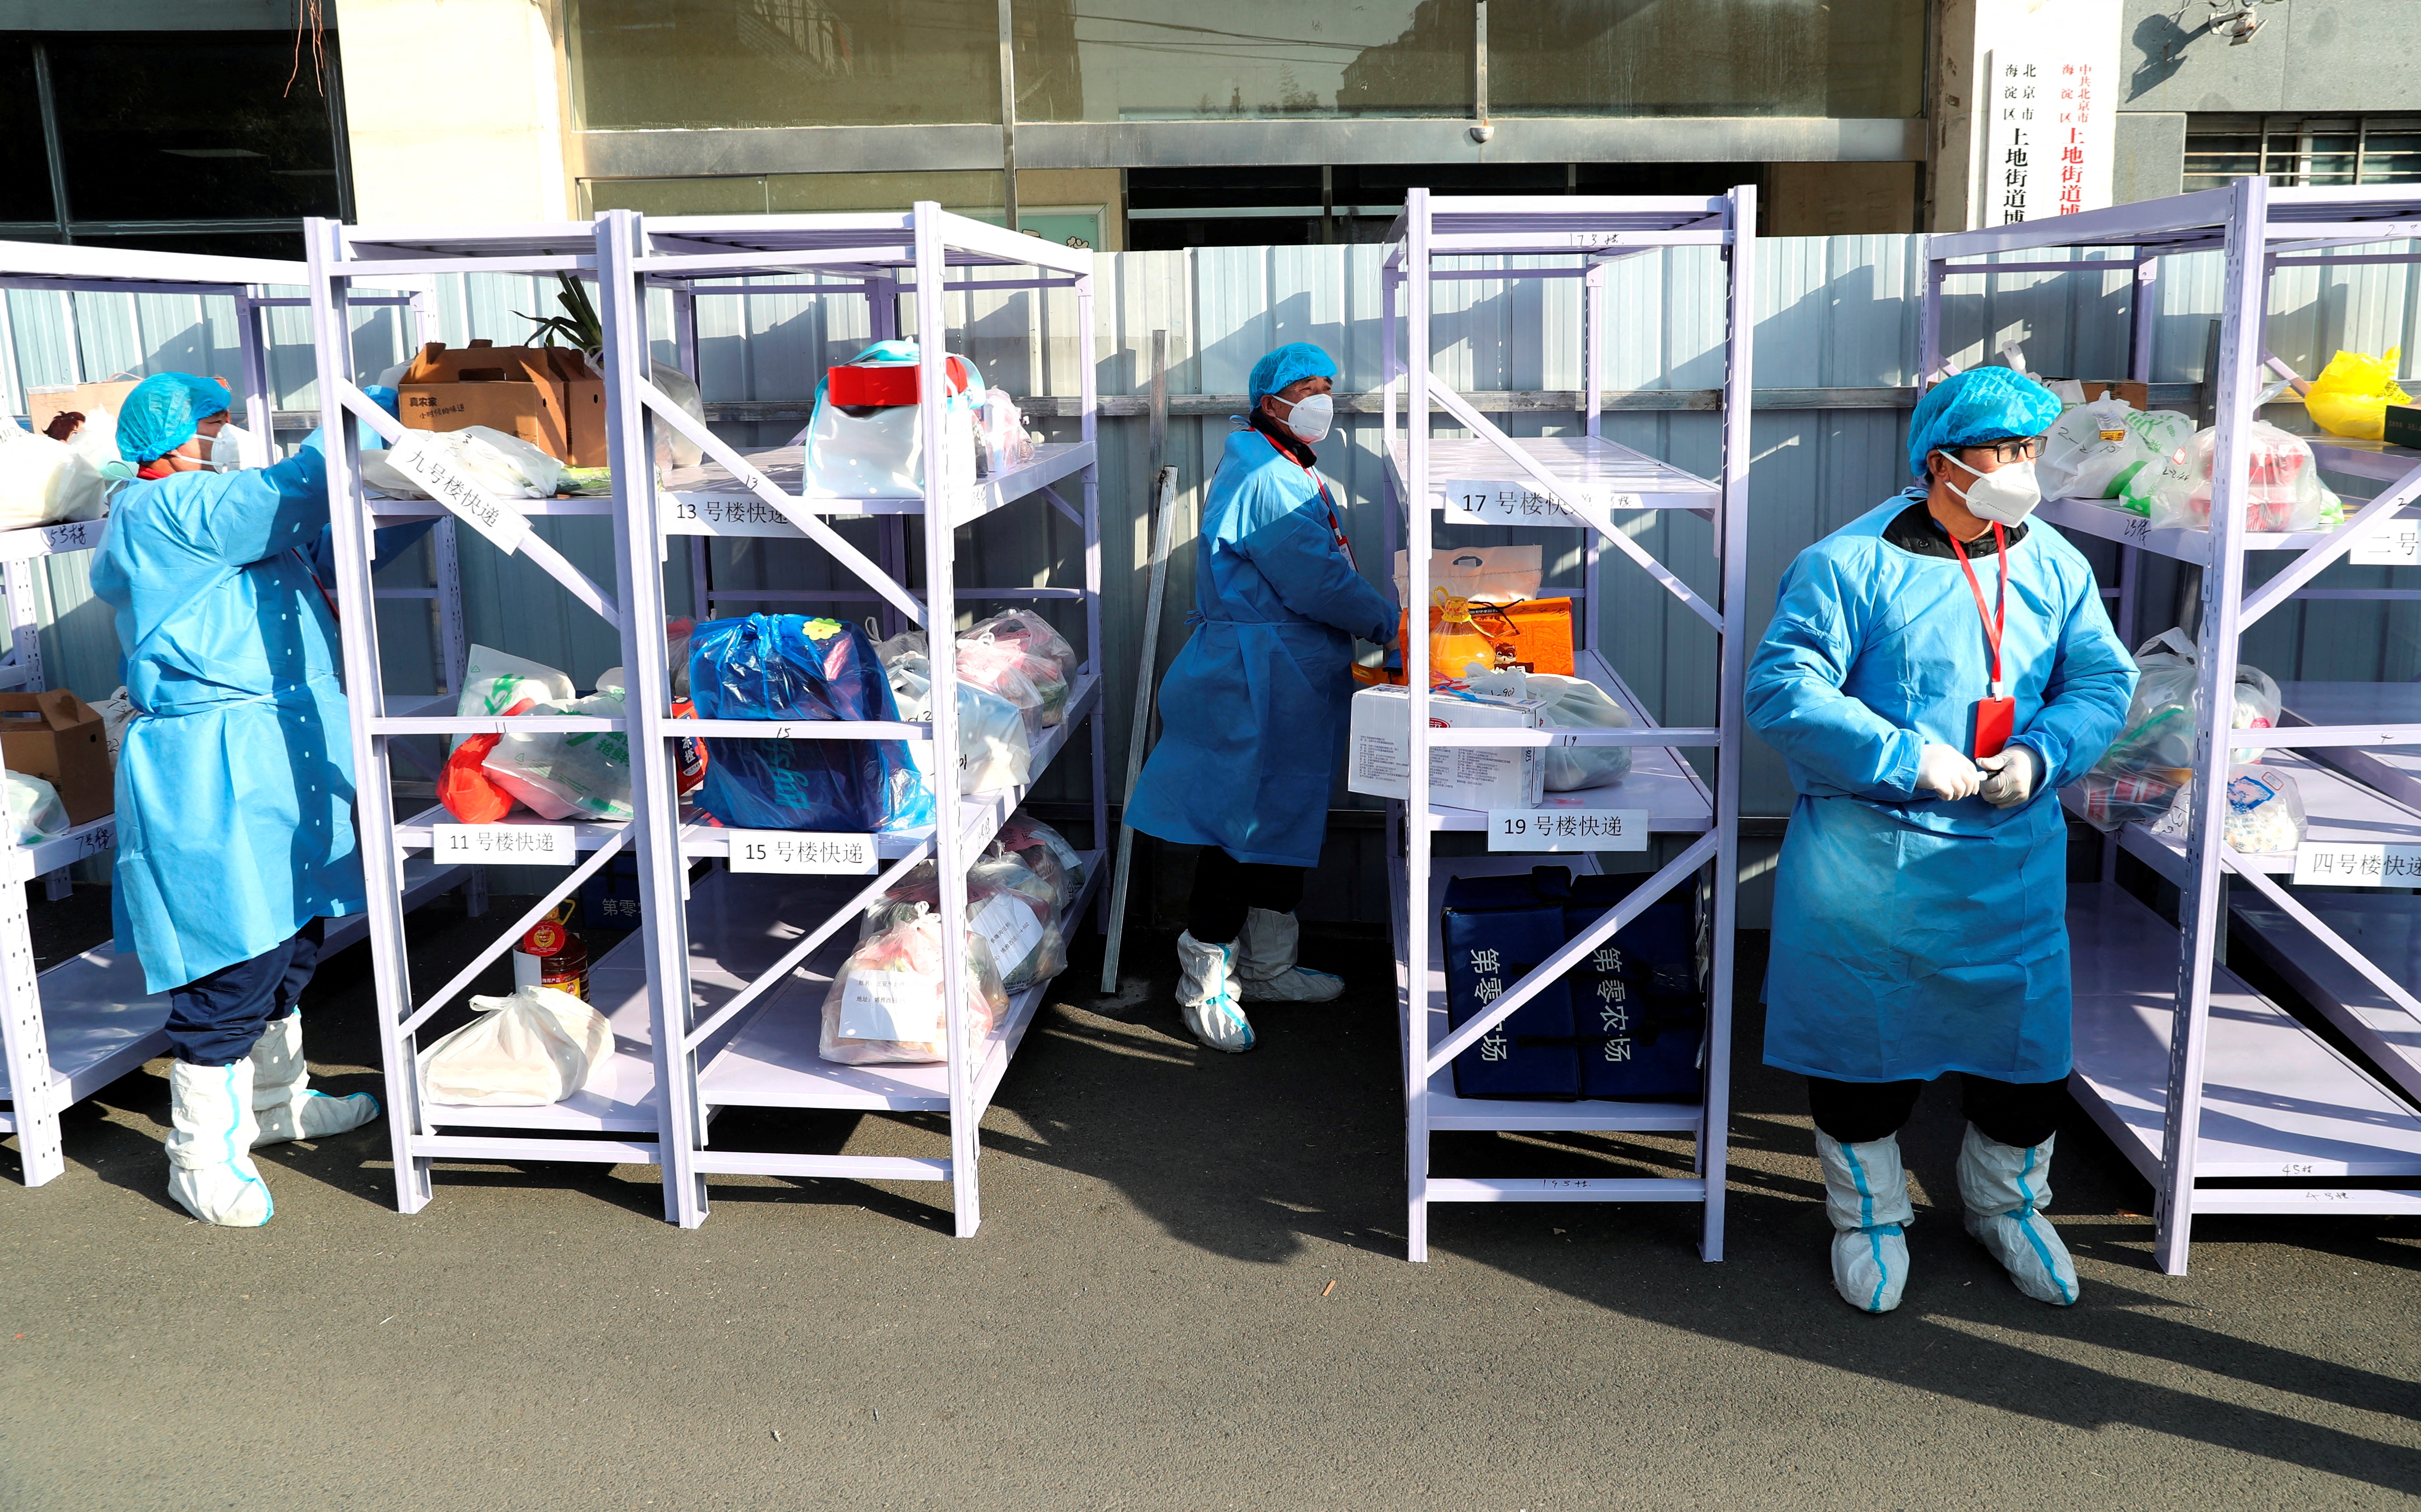 Workers wearing protective suits following the coronavirus disease (COVID-19) outbreak stand next to daily necessities placed on makeshift delivery racks, at a residential compound under lockdown after a case of the Omicron variant was detected, in Beijing's Haidian district, China January 18, 2022. China Daily via REUTERS